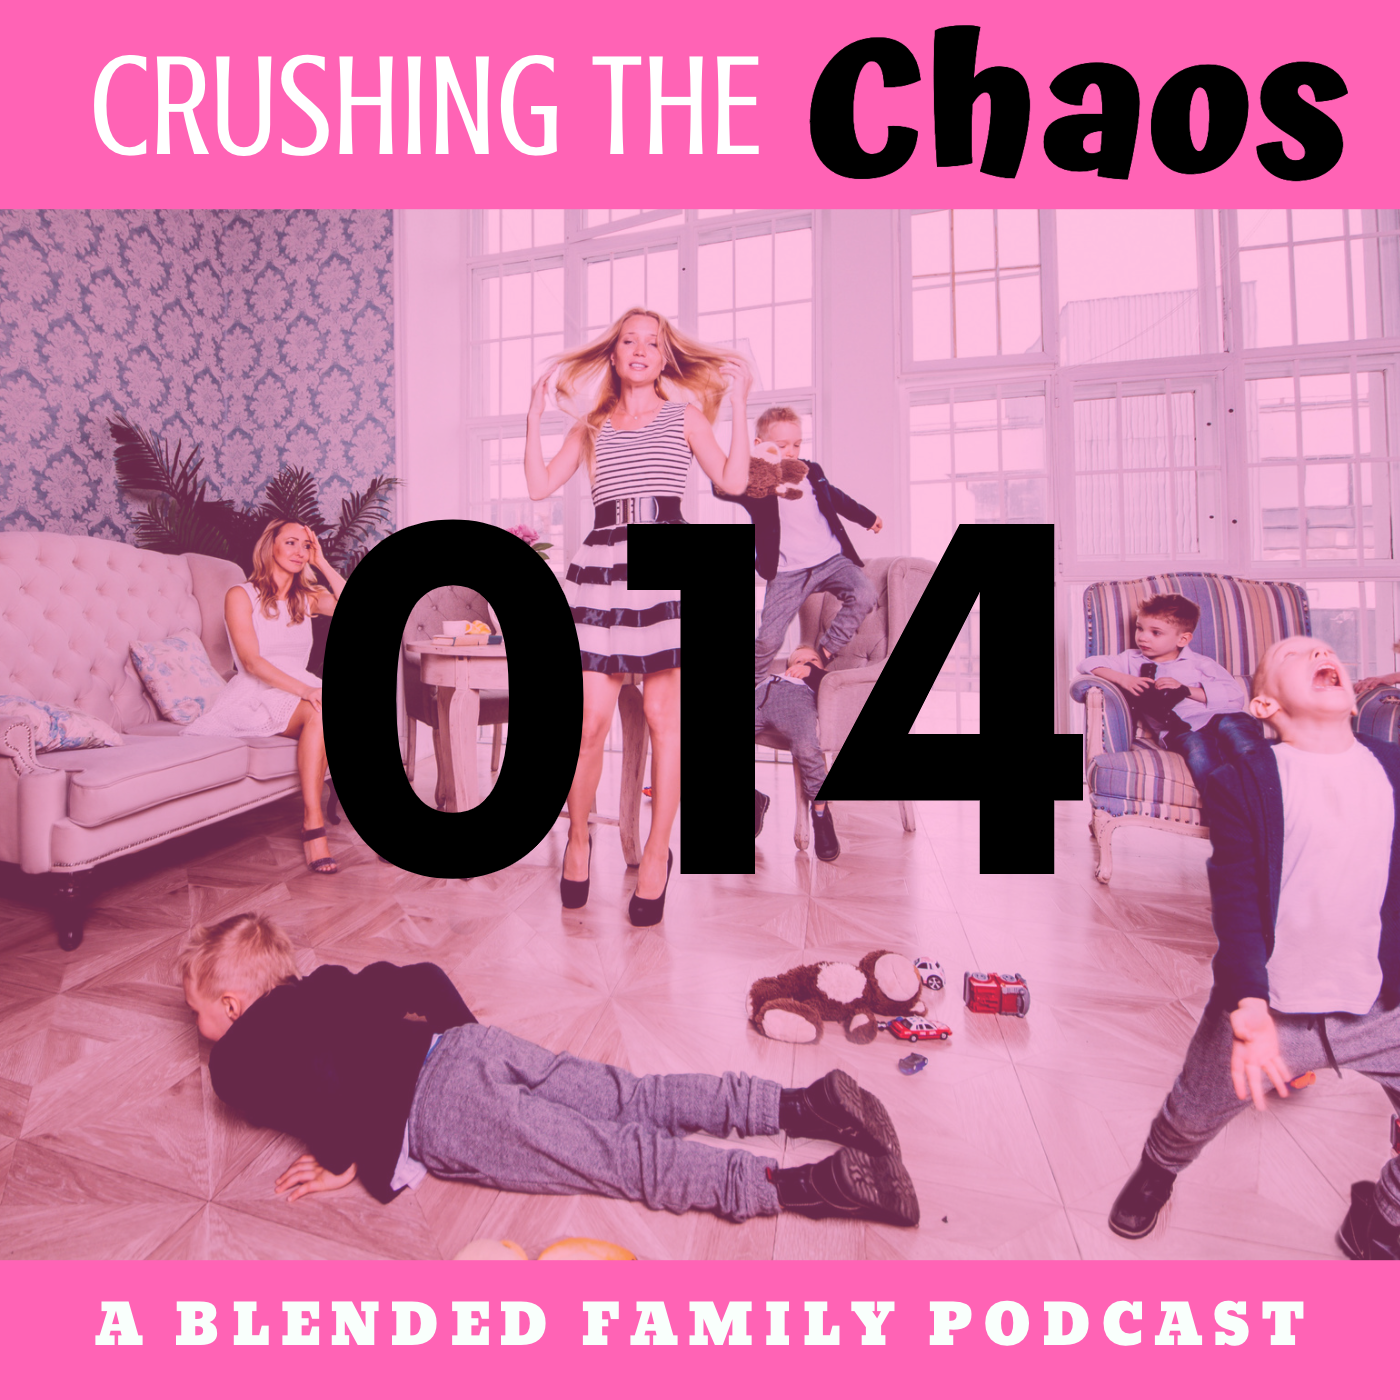 Website Crushing the Chaos - Podcast Cover.png